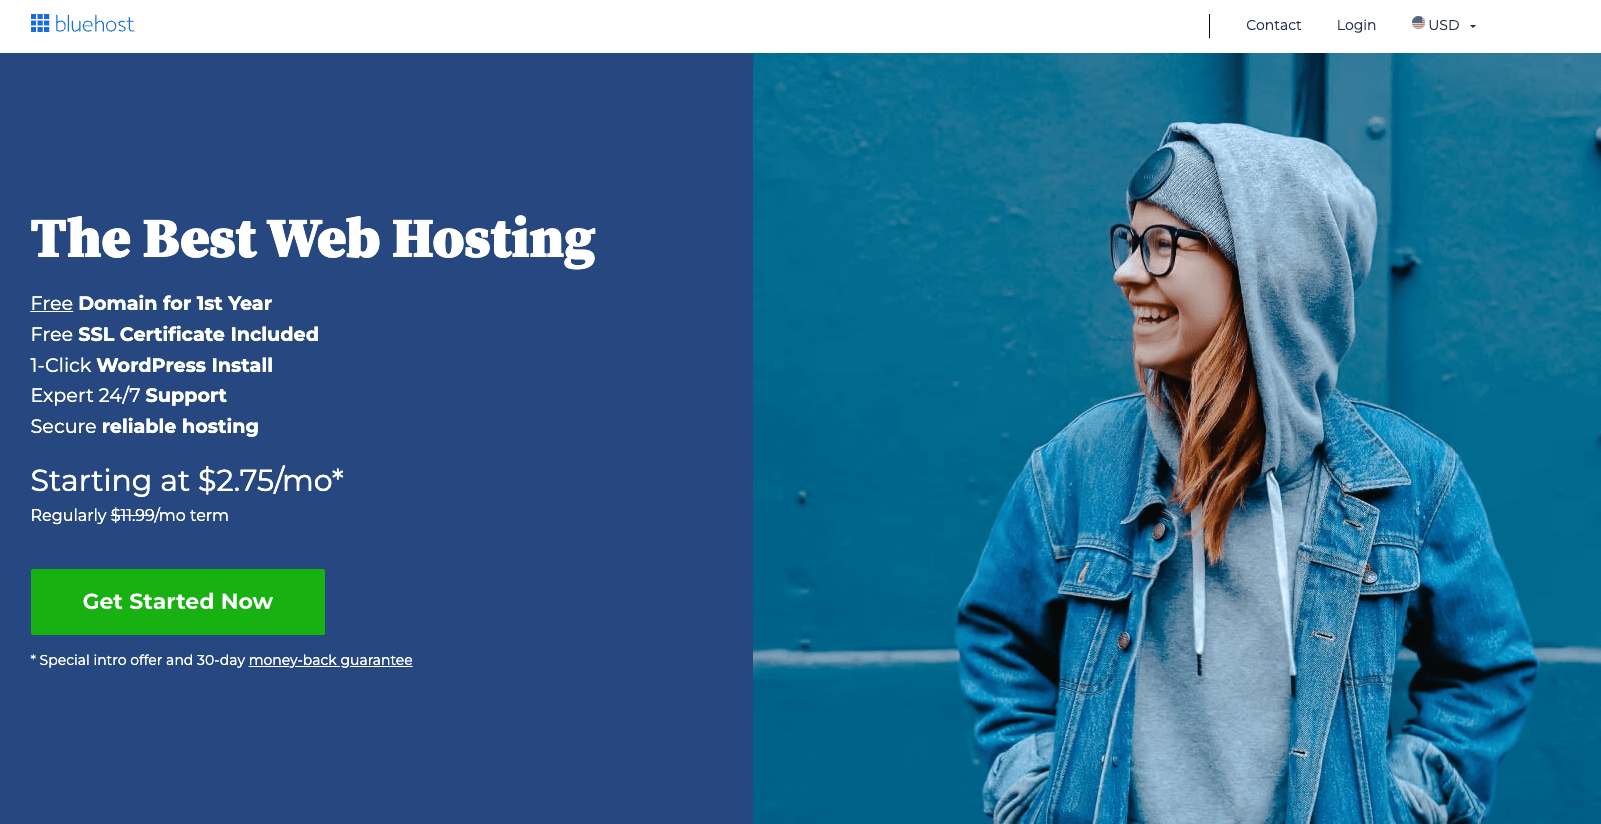 What Is a Hosting Provider: Bluehost